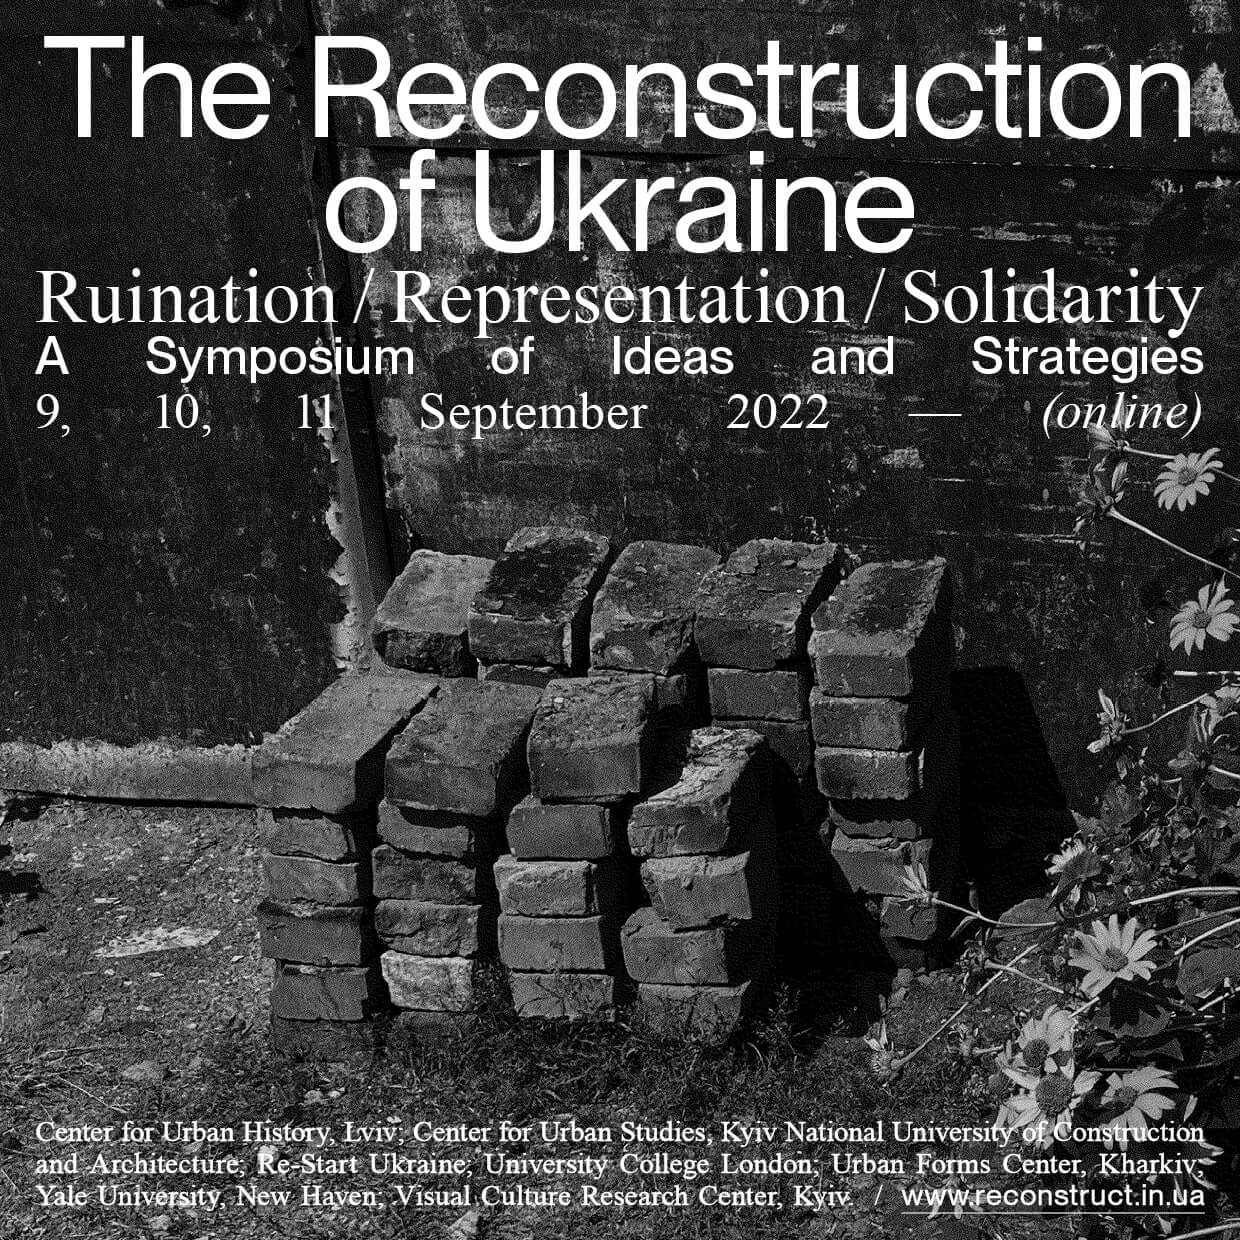 graphic for an online seminar on the reconstruction of ukraine